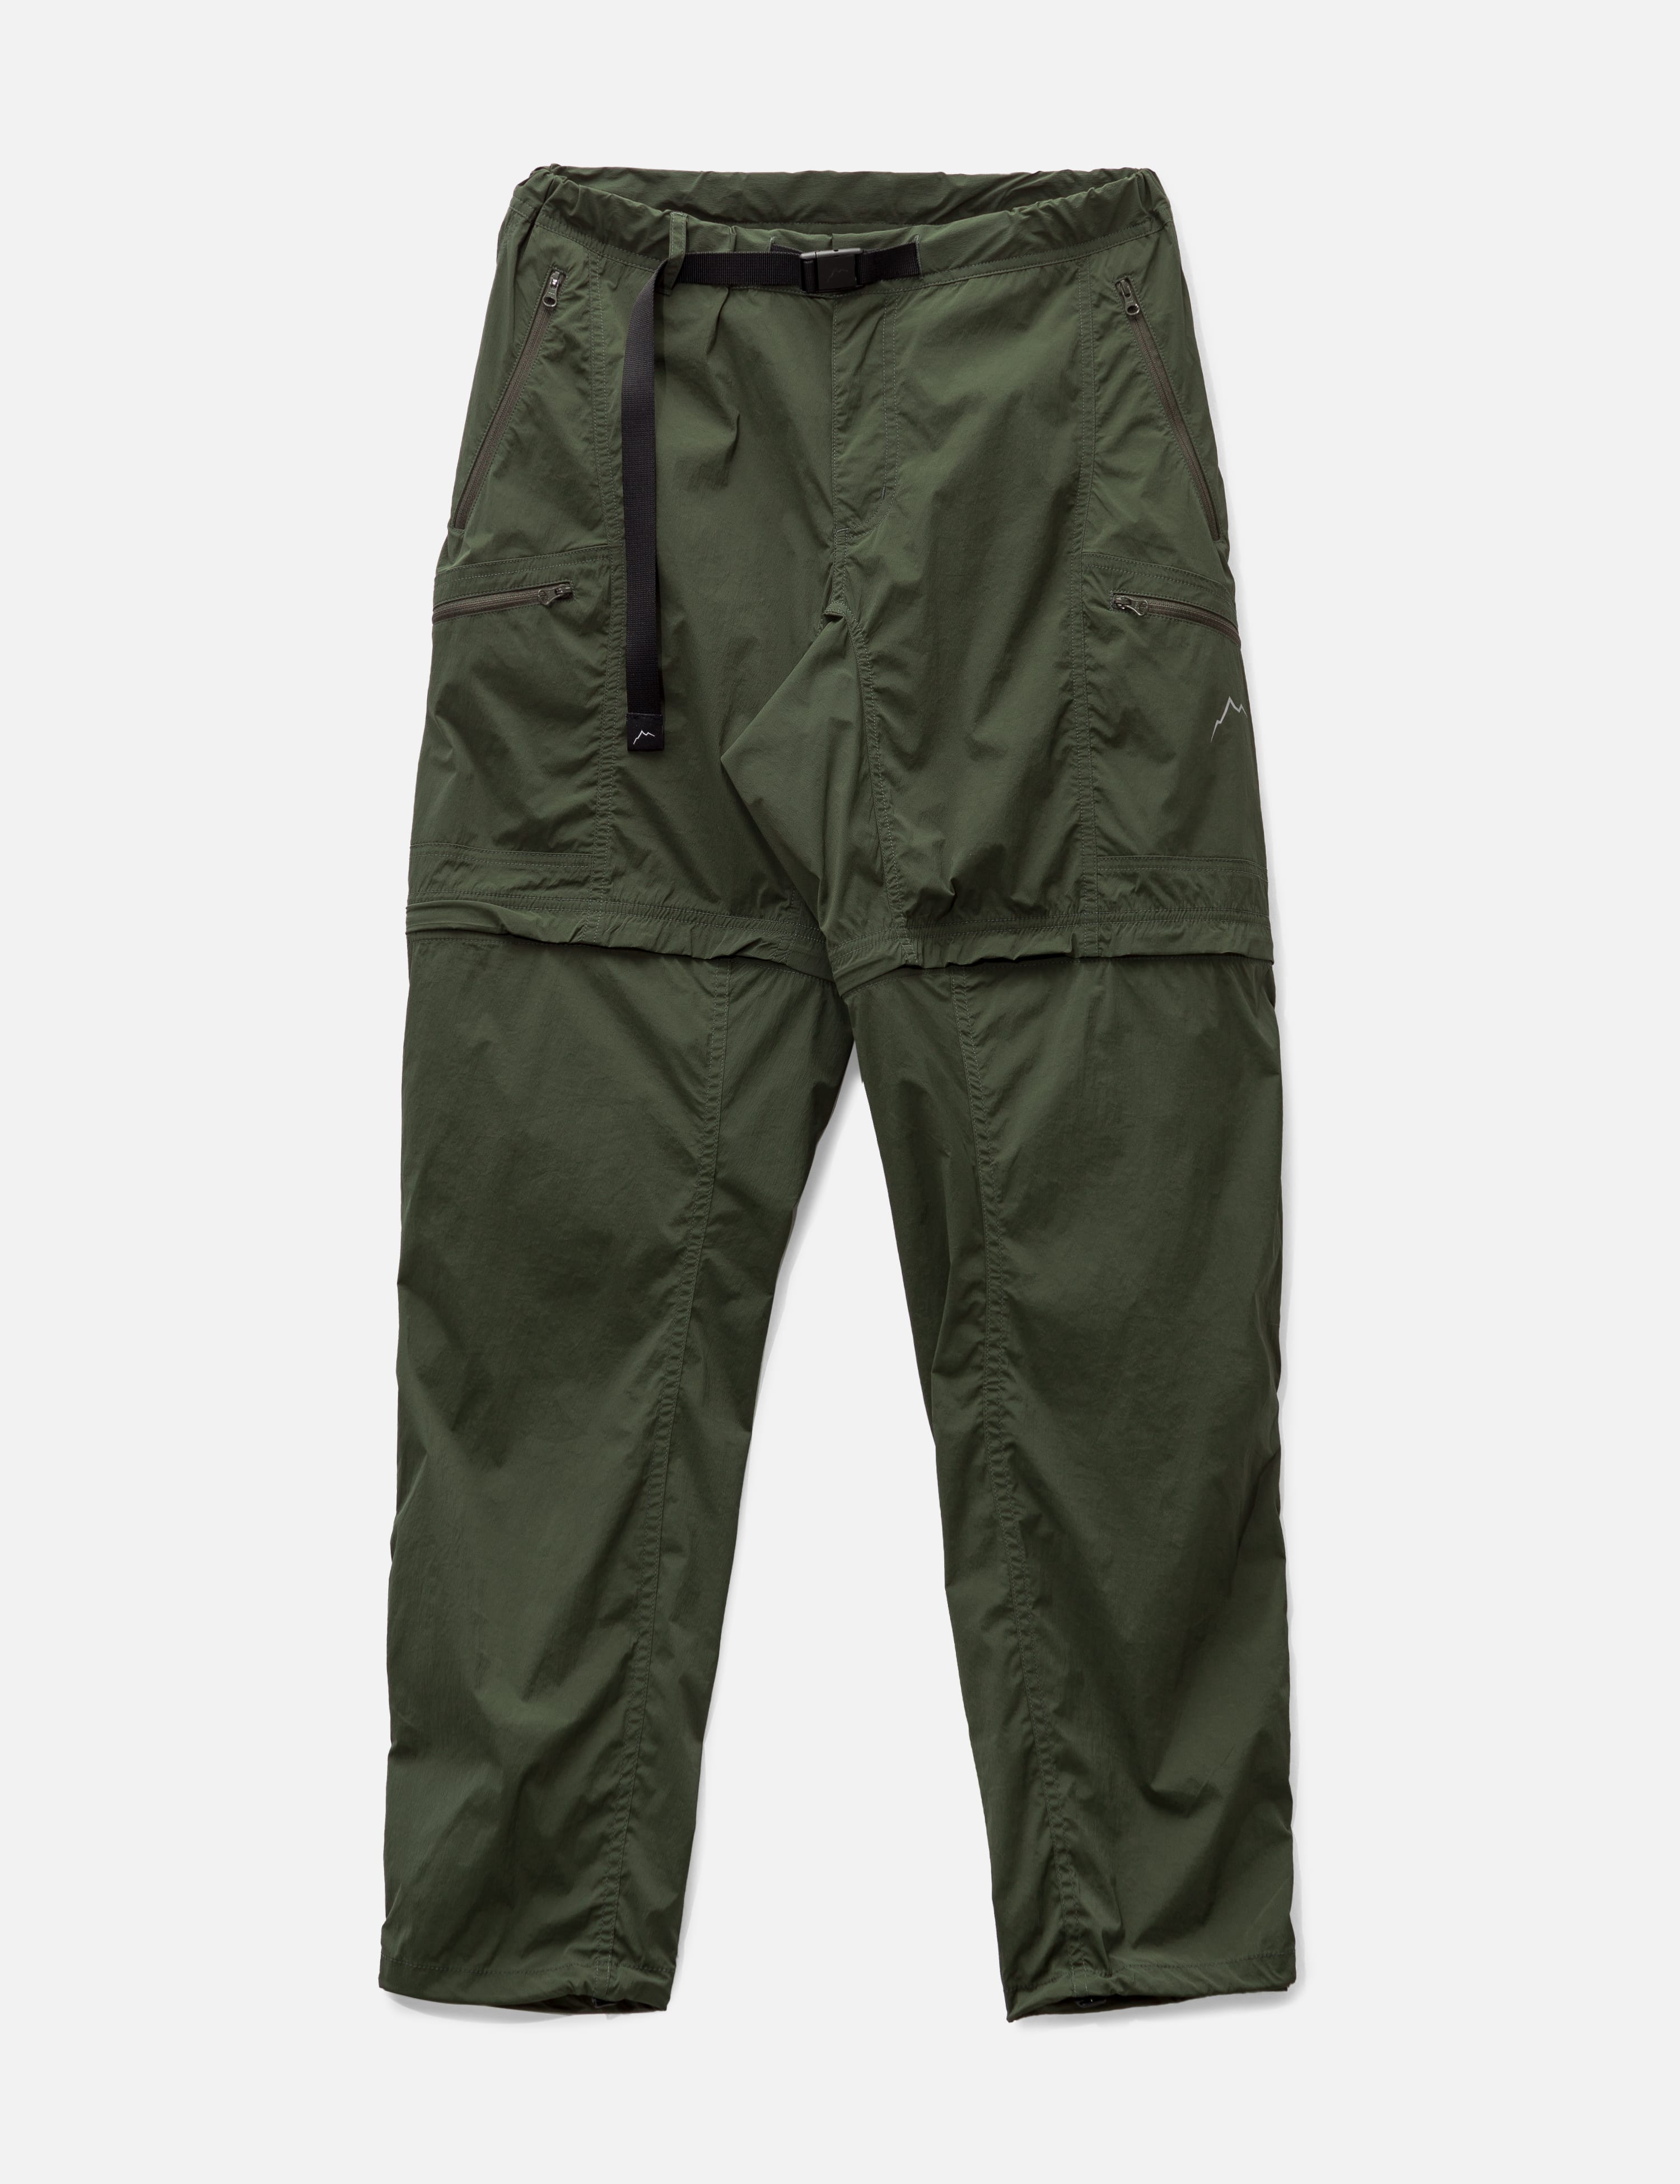 CAYL - Cargo 2Way Pants | HBX - Globally Curated Fashion and